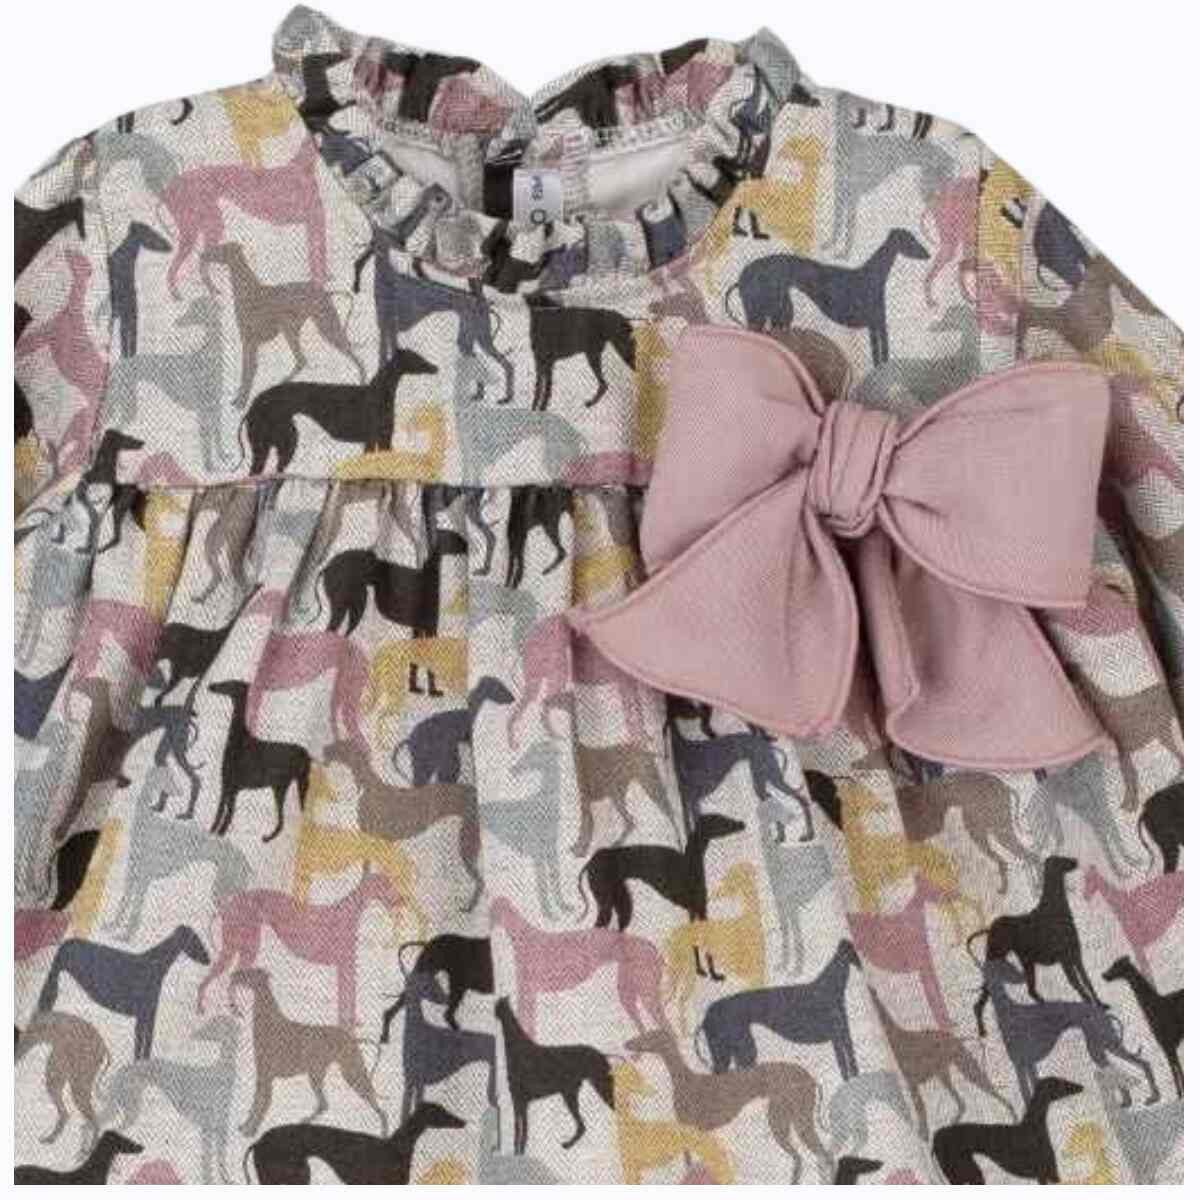 GRILS PUPPY PRINT FRILLED NECK DRESS WITH BIG BOW CALAMARO - 2